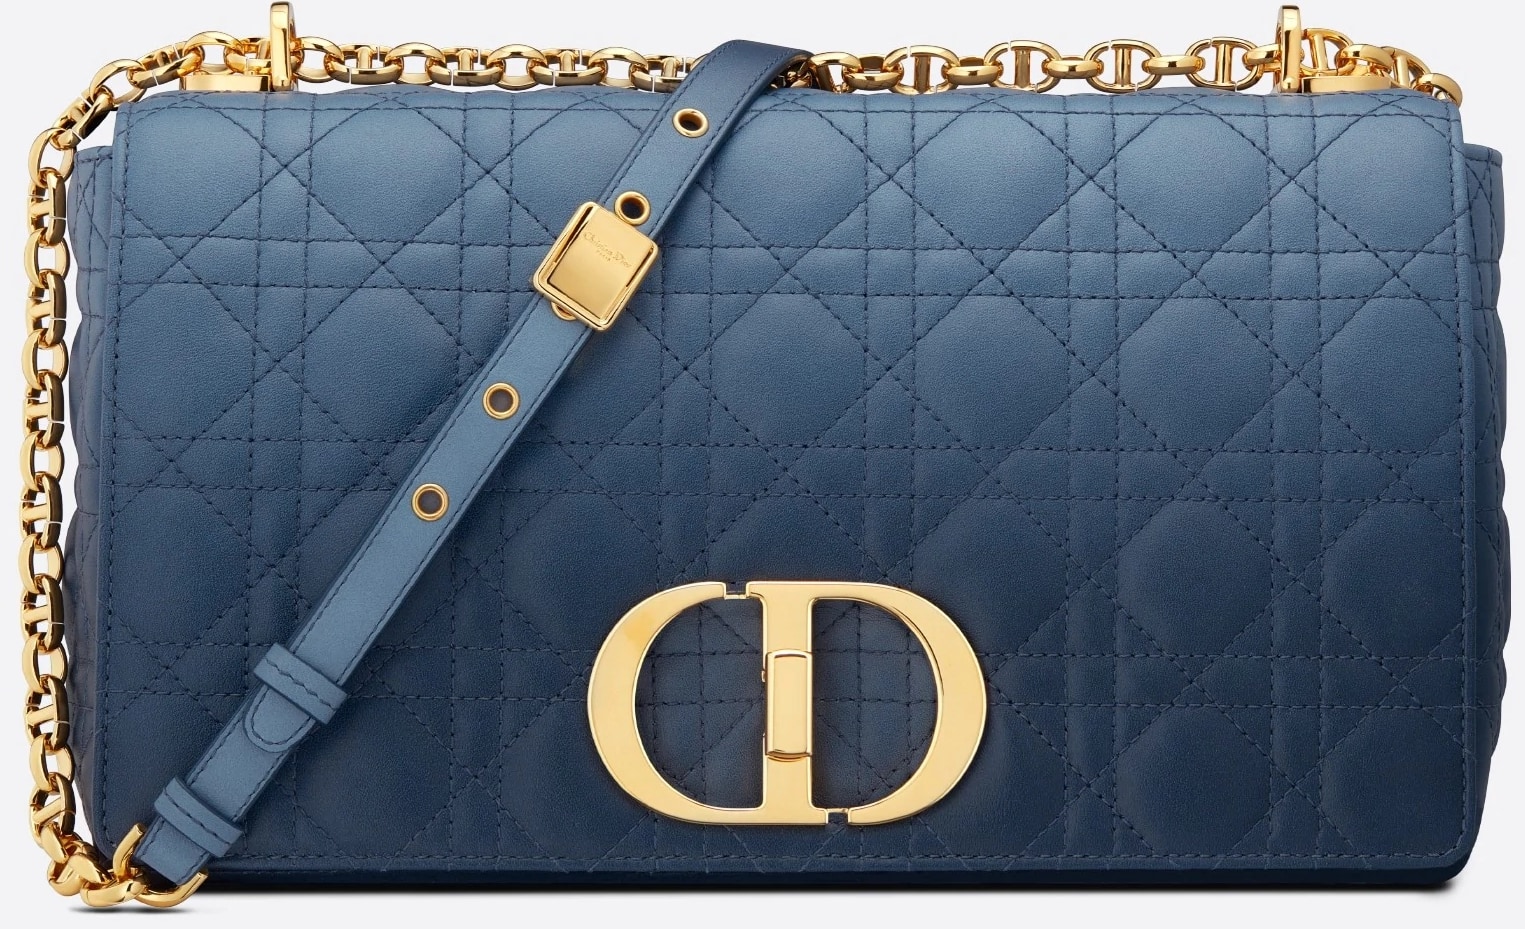 This Dior Caro bag in indigo blue lambskin costs $5,300 and combines modernity and timeless elegance